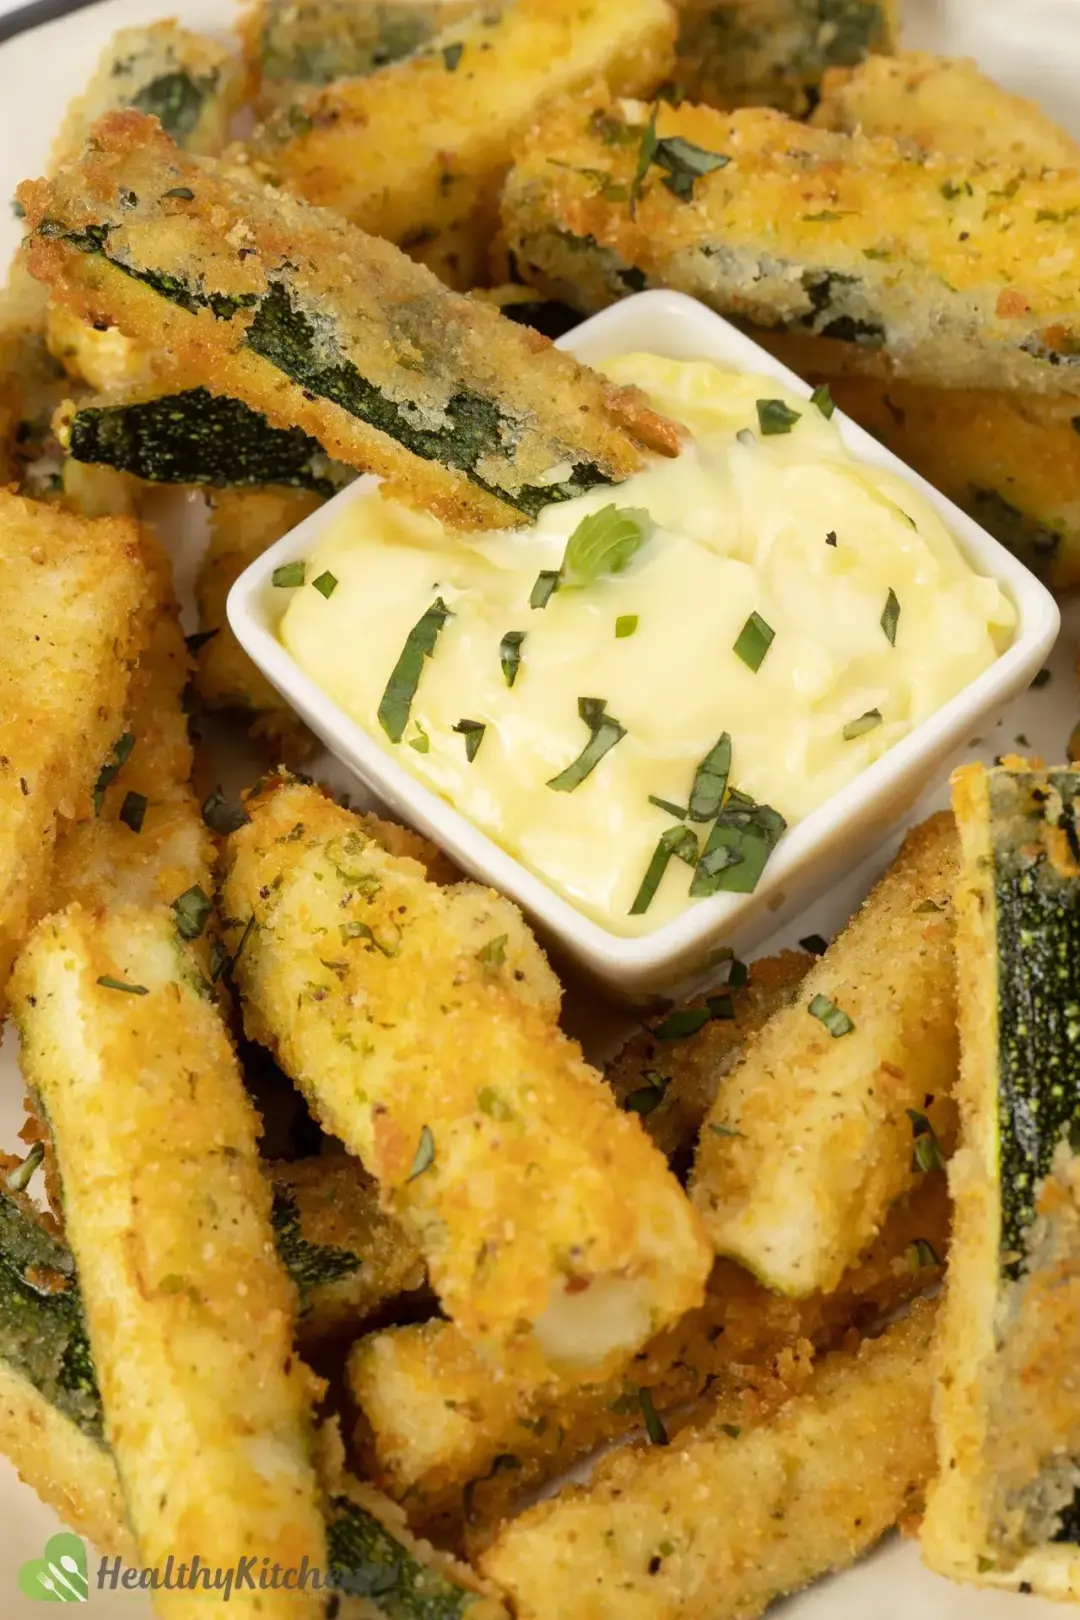 A mayonnaise dipping put inside a plate of zucchini fries, garnished with chopped herbs